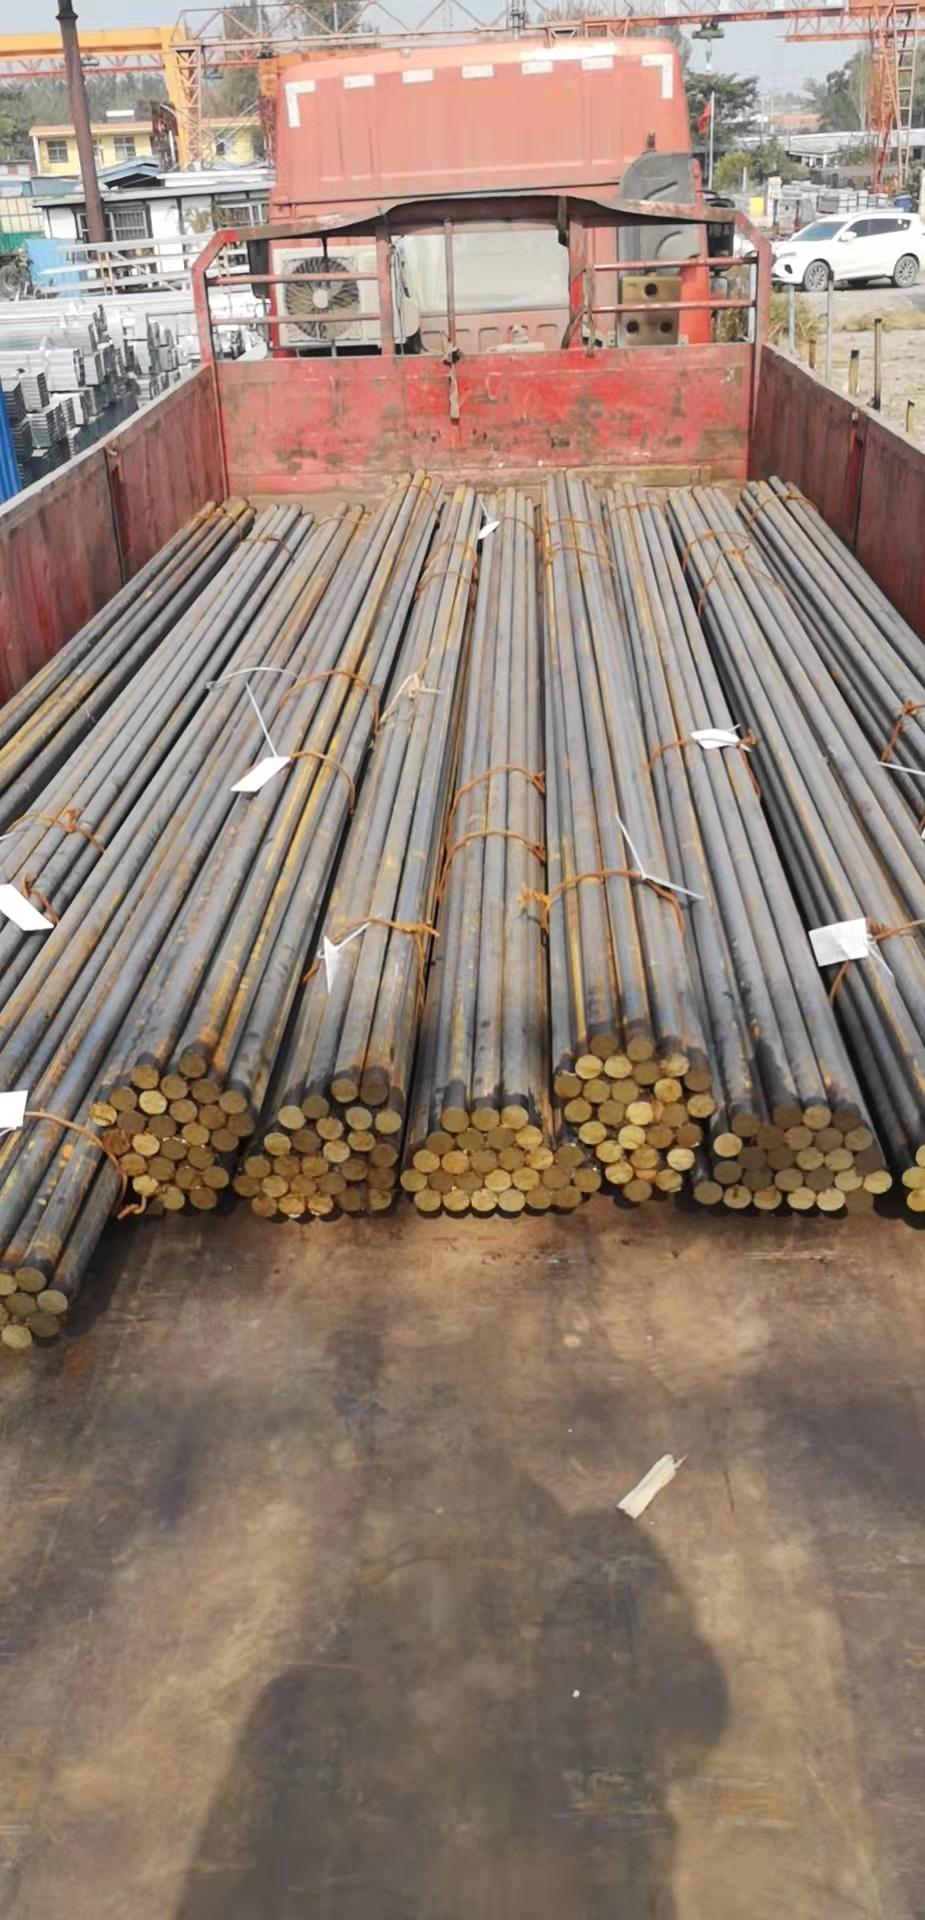 China Factory with Big Stock 1045 1095 1085 1070 1060 1055 Carbon Steel Round Bar Rod